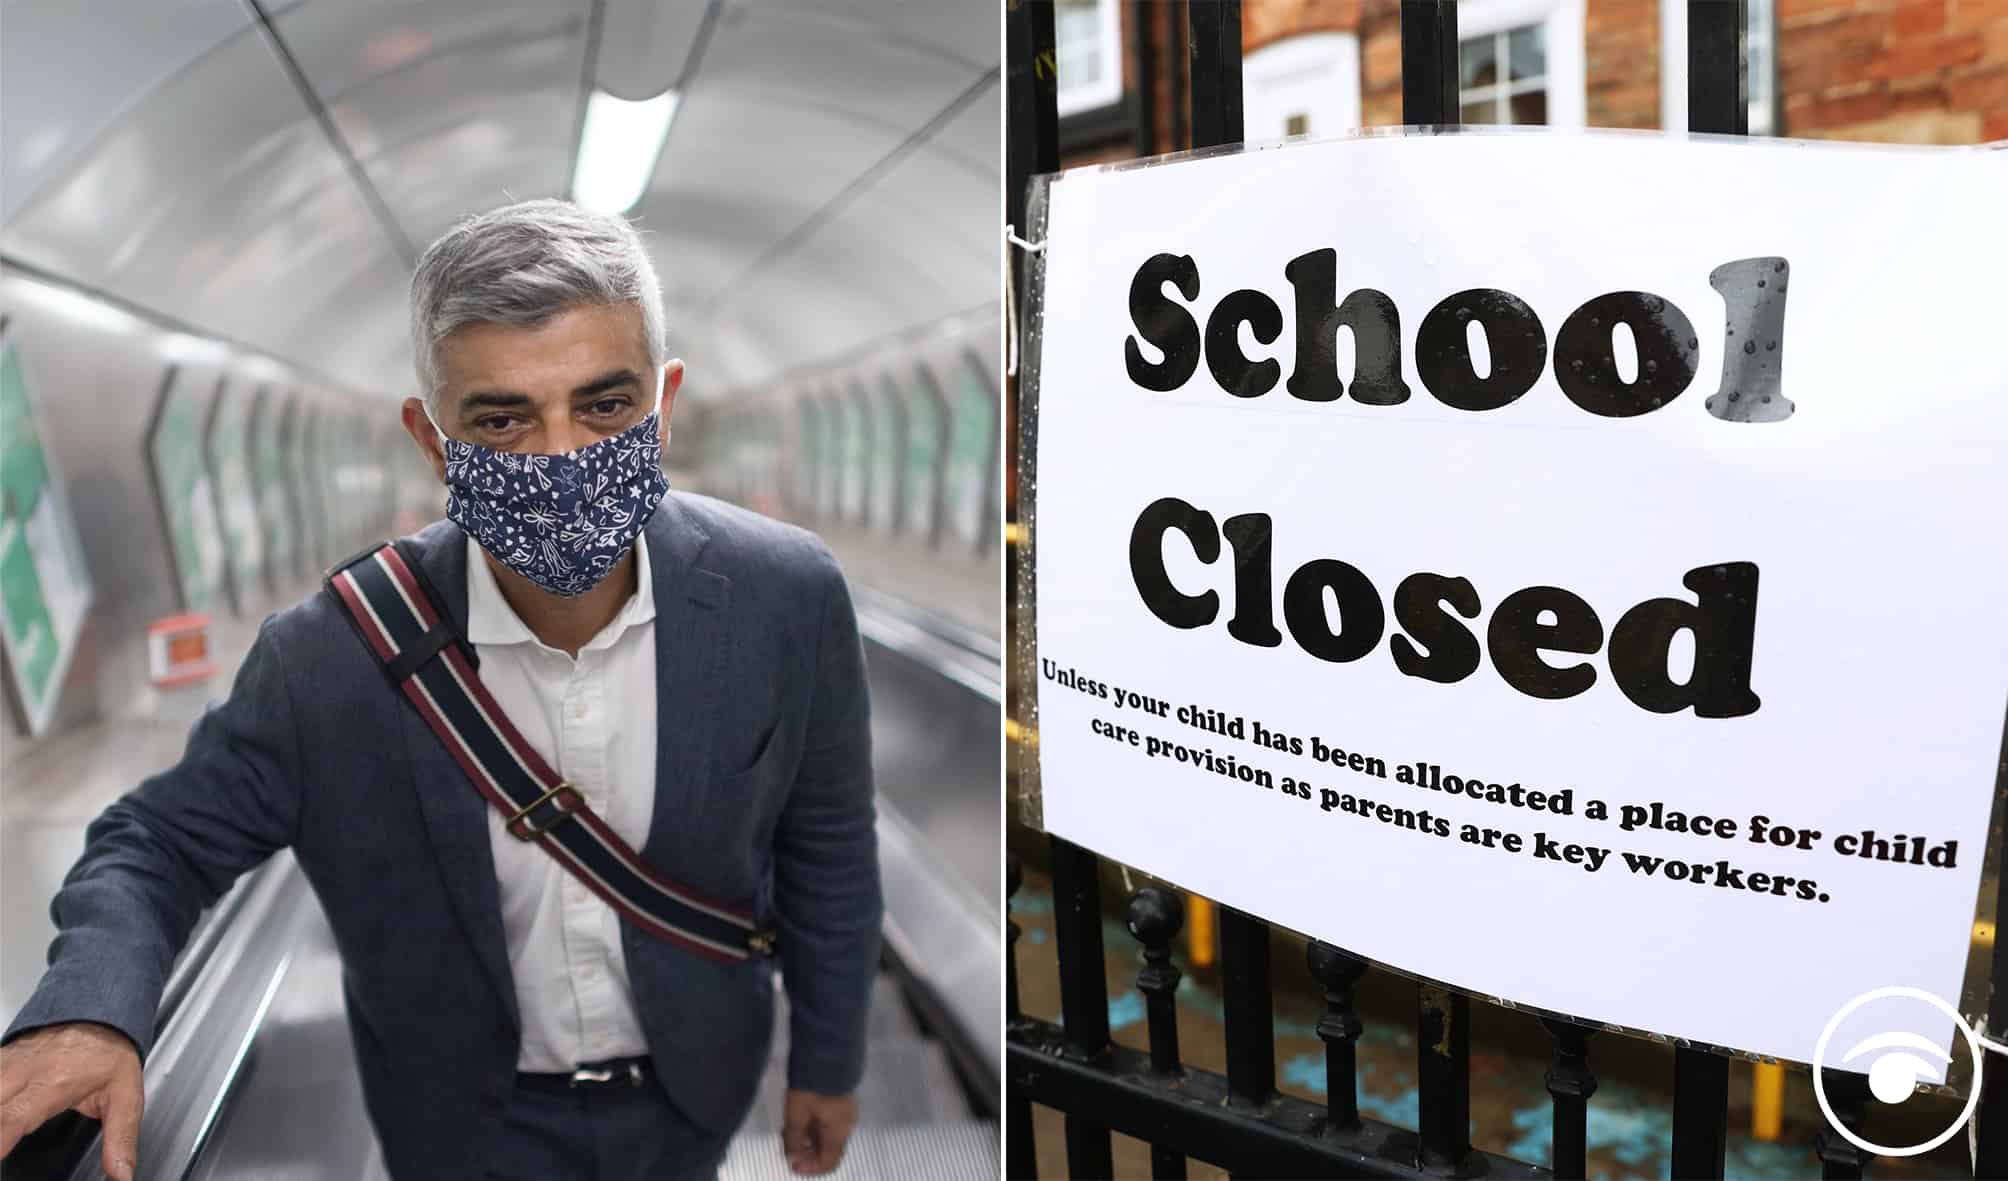 London’s surge in Covid-19 cases ‘deeply concerning’ as schools in one borough to close tomorrow